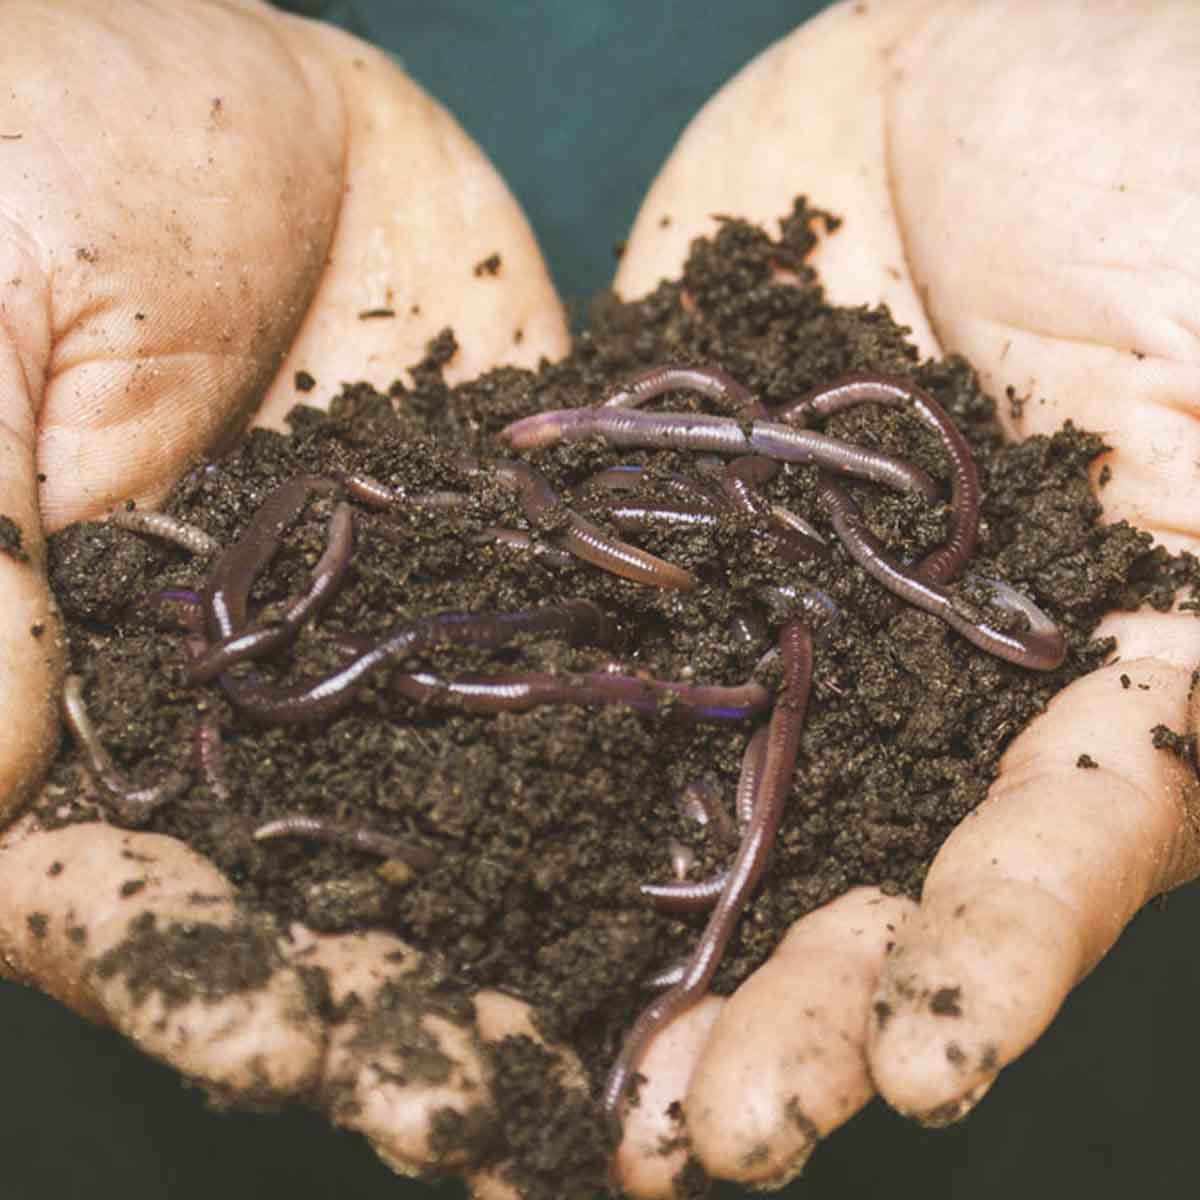 Gardeners hands hold soil and worms.